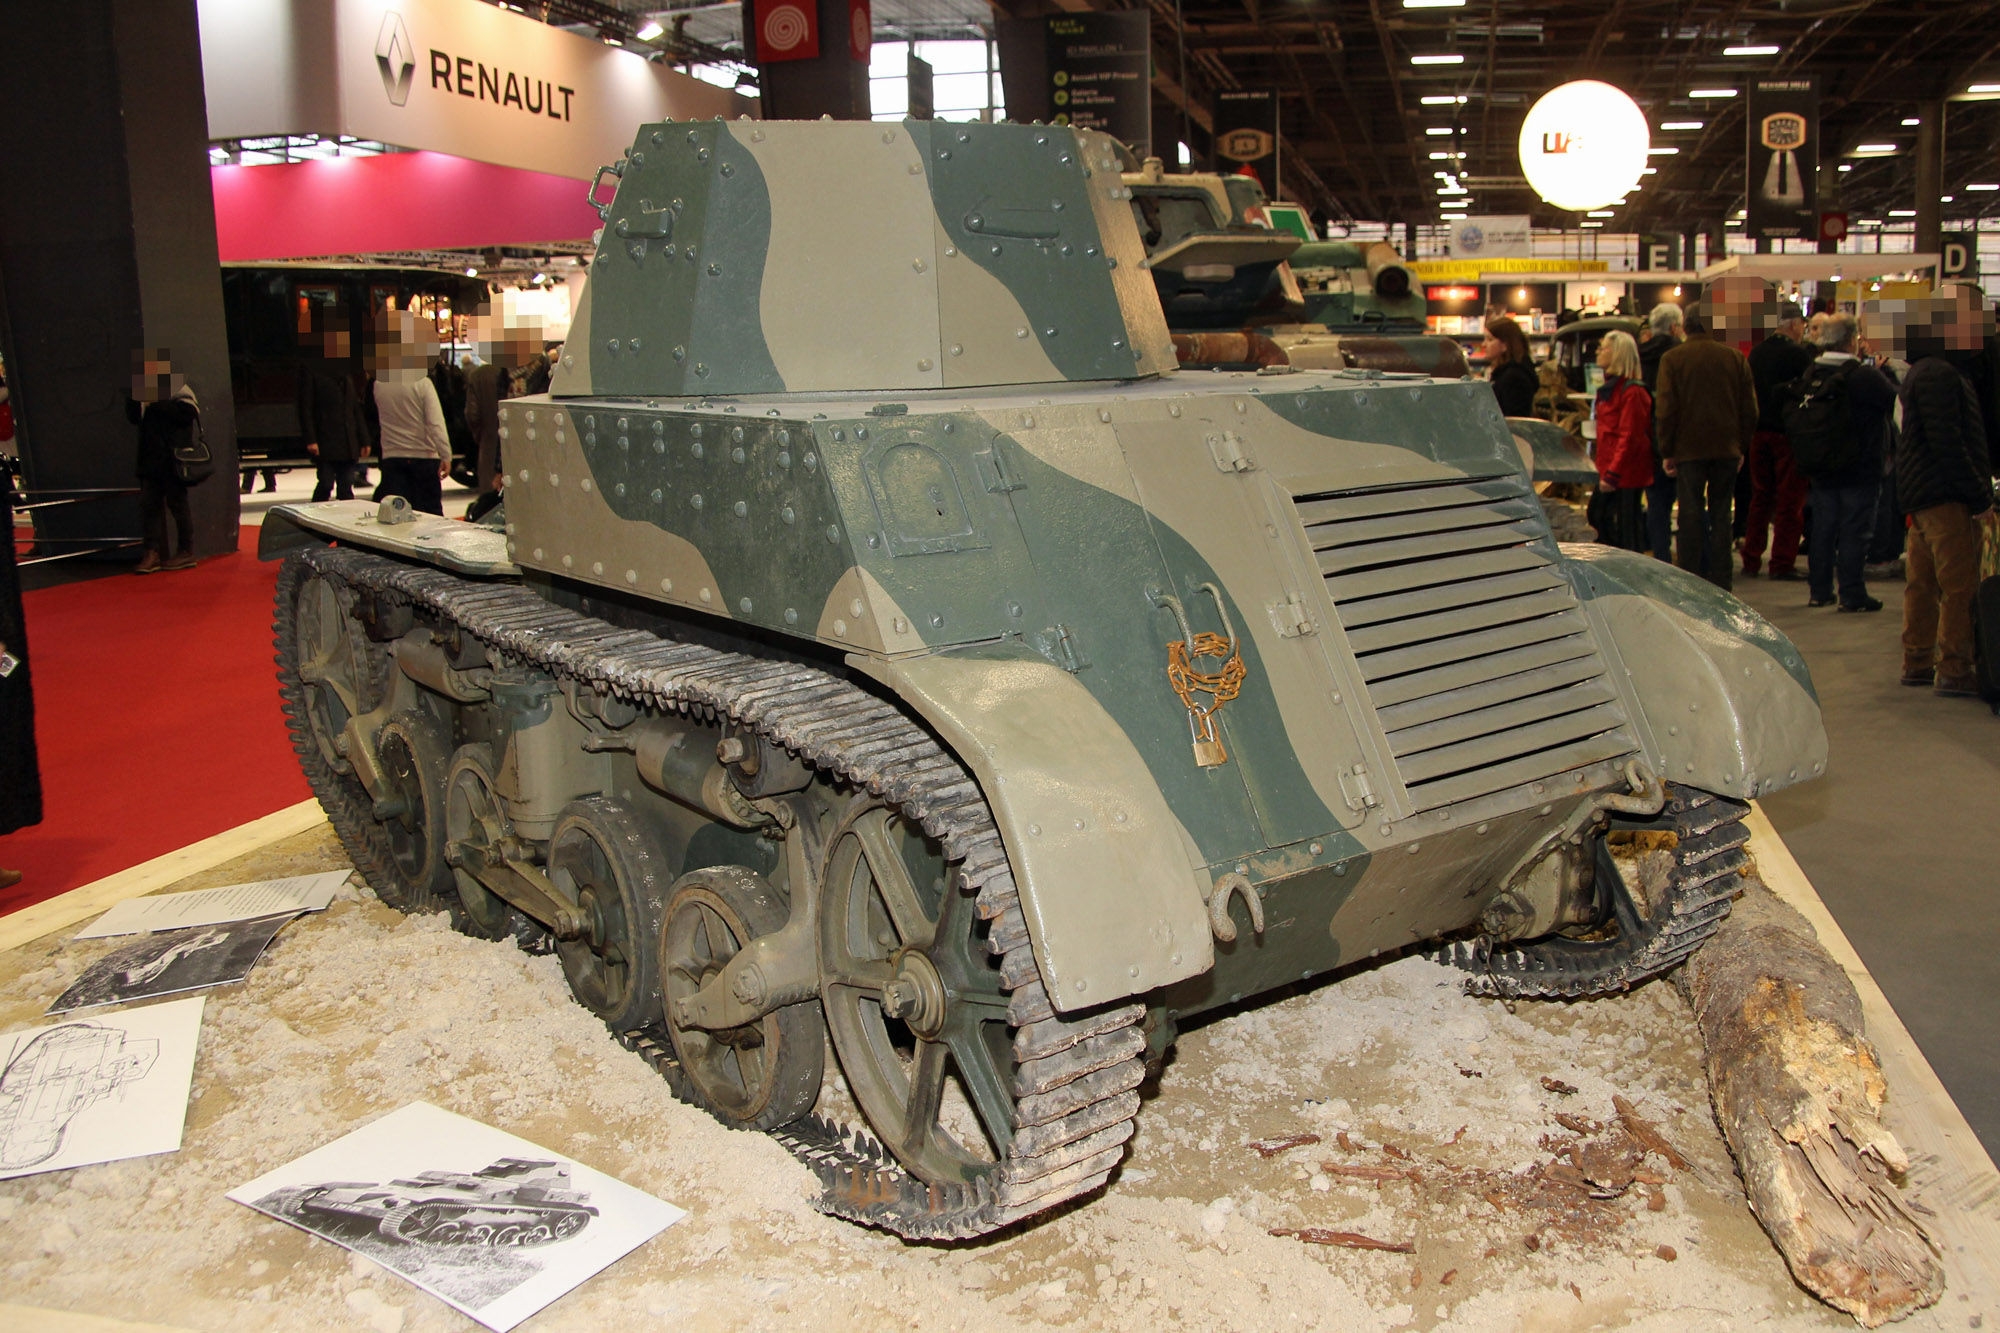 Renault "Militaire" AMR 33